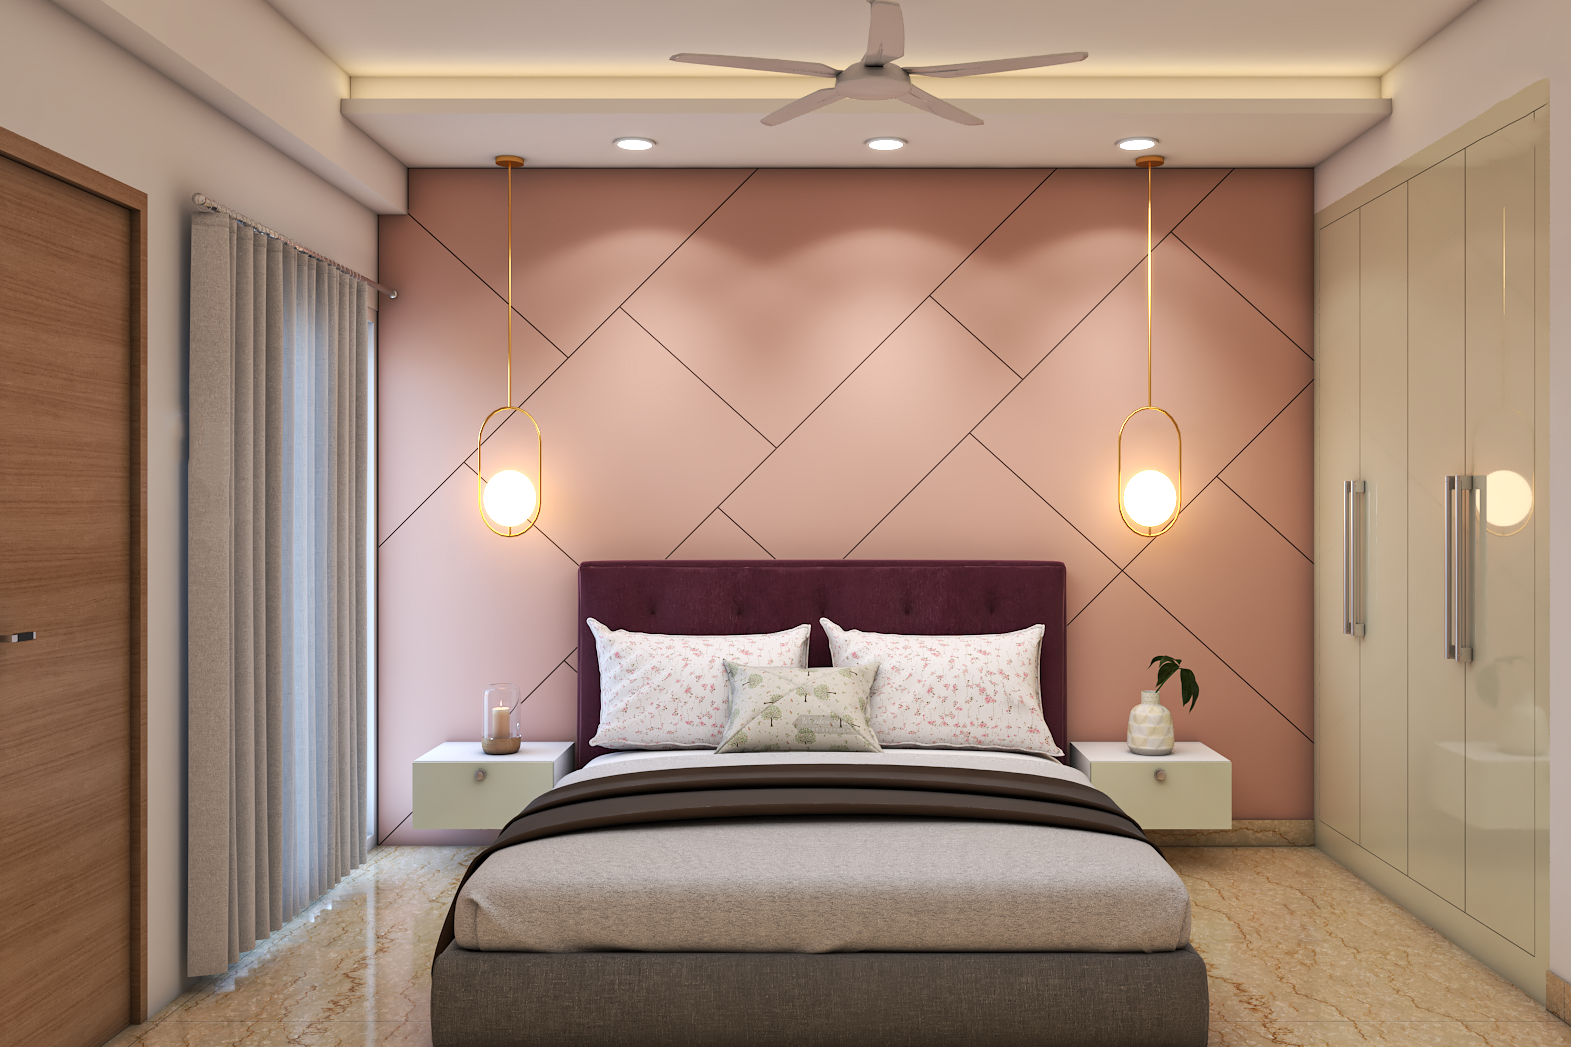 Modern Peach Bedroom Wall Design With Grooves